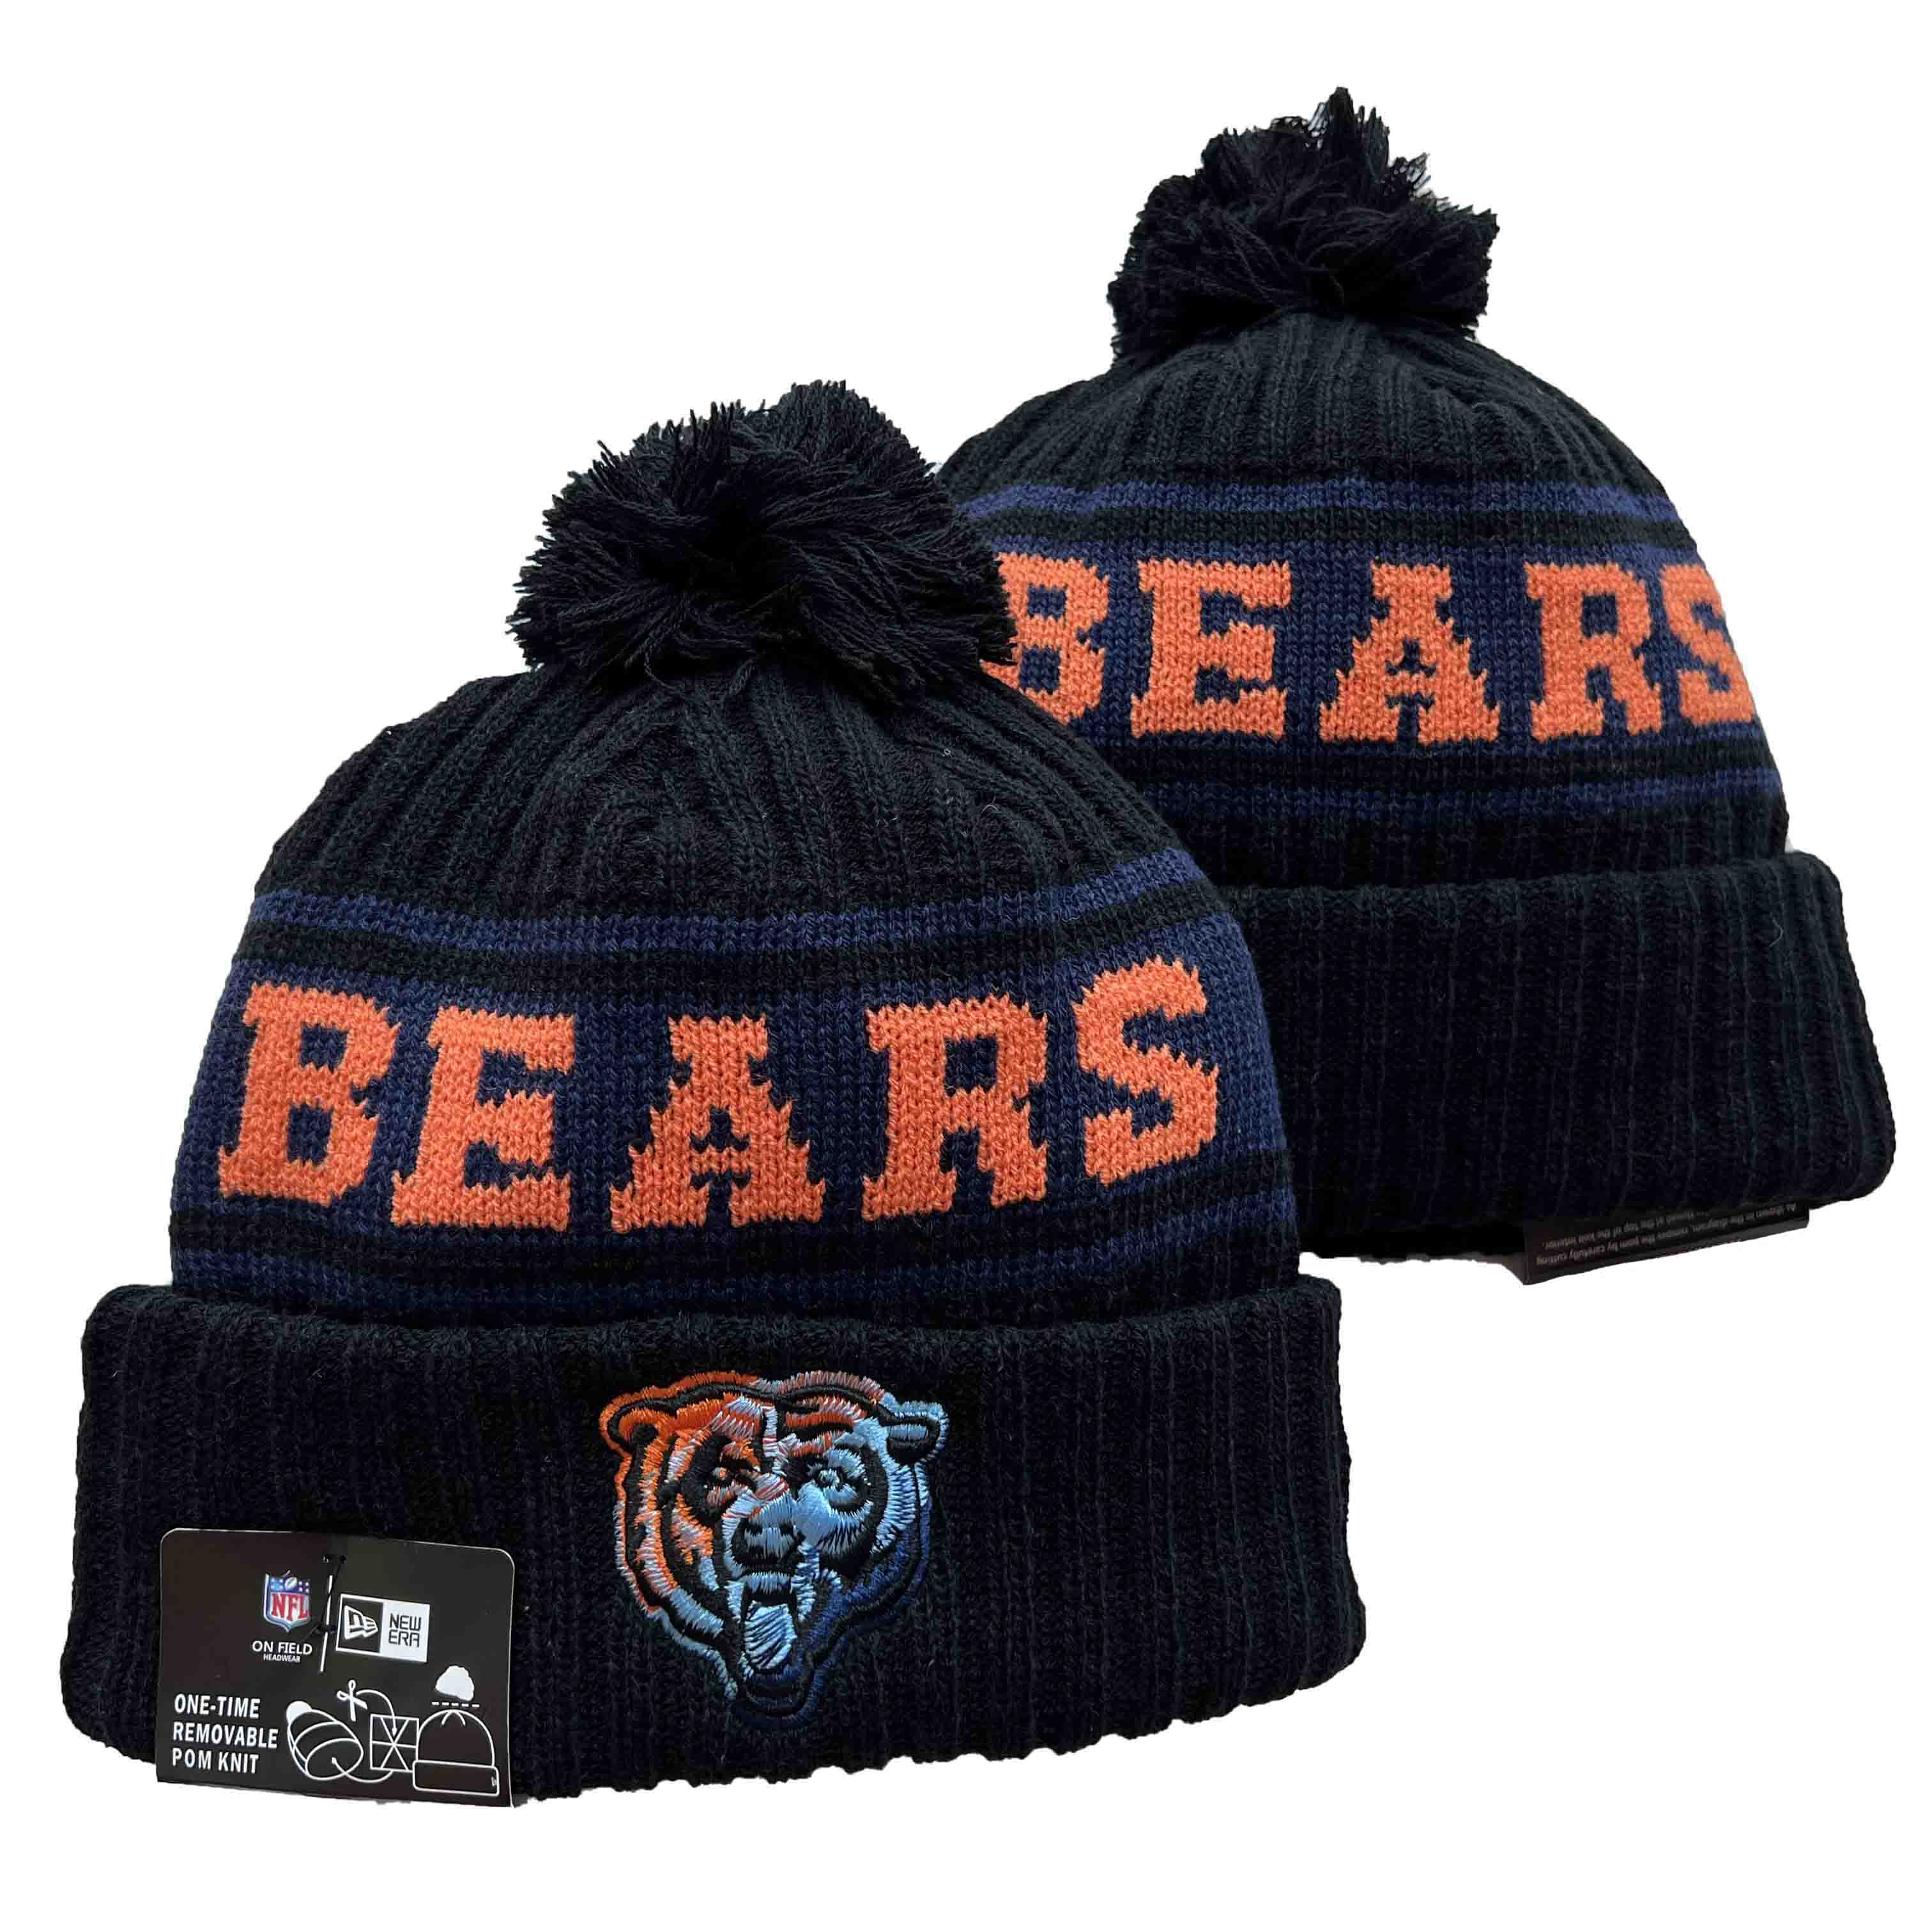 NFL Chicago Bears Beanies Knit Hats-YD901